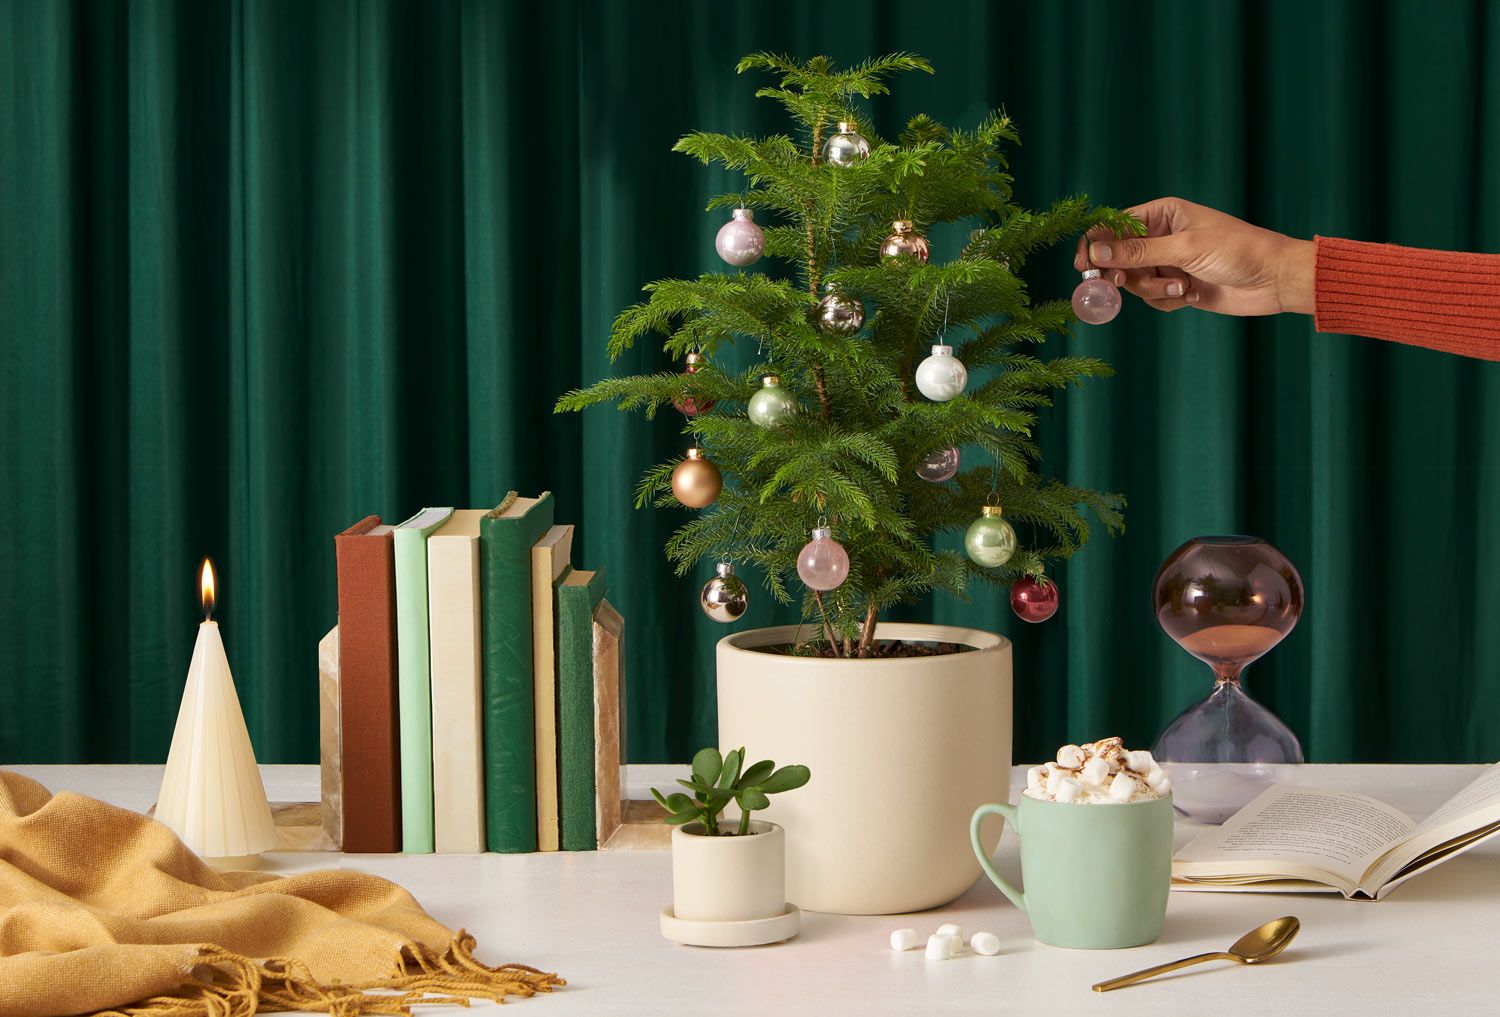 Decorate Your Plants for Christmas With These 4 Merry Ways - Omysa